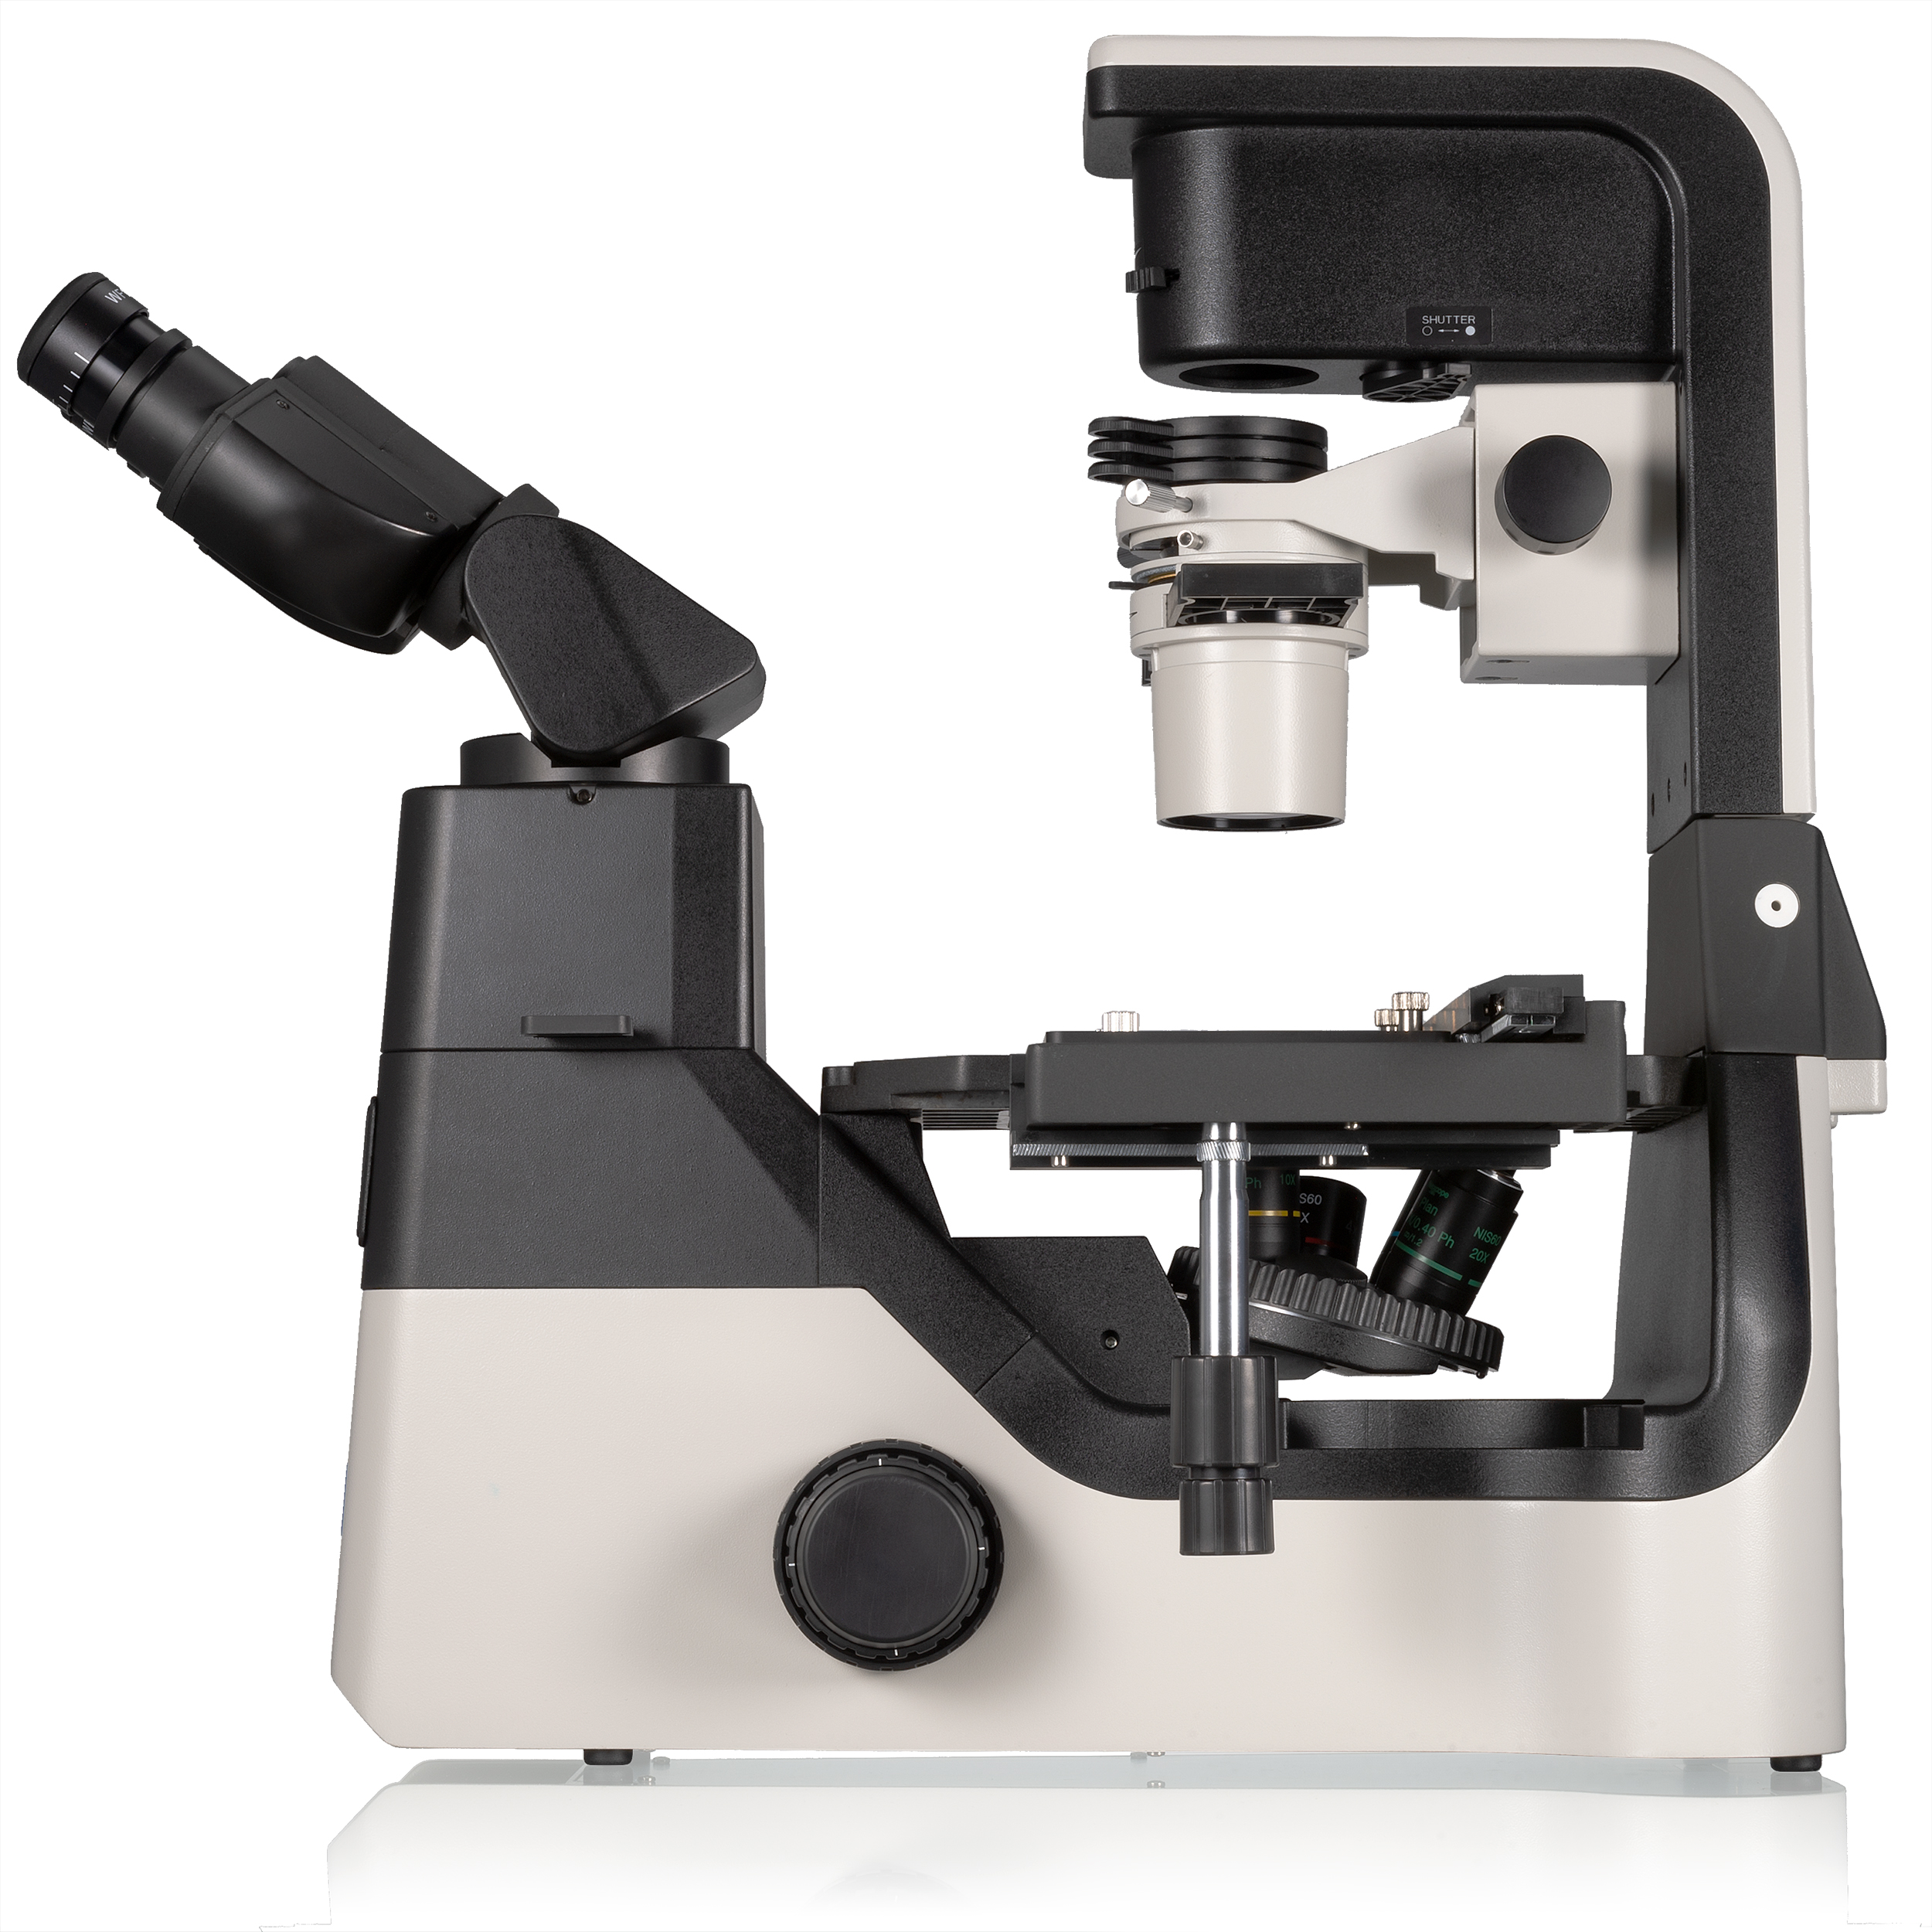 Nexcope NIB630 inverted research microscope with tiltable lighting unit